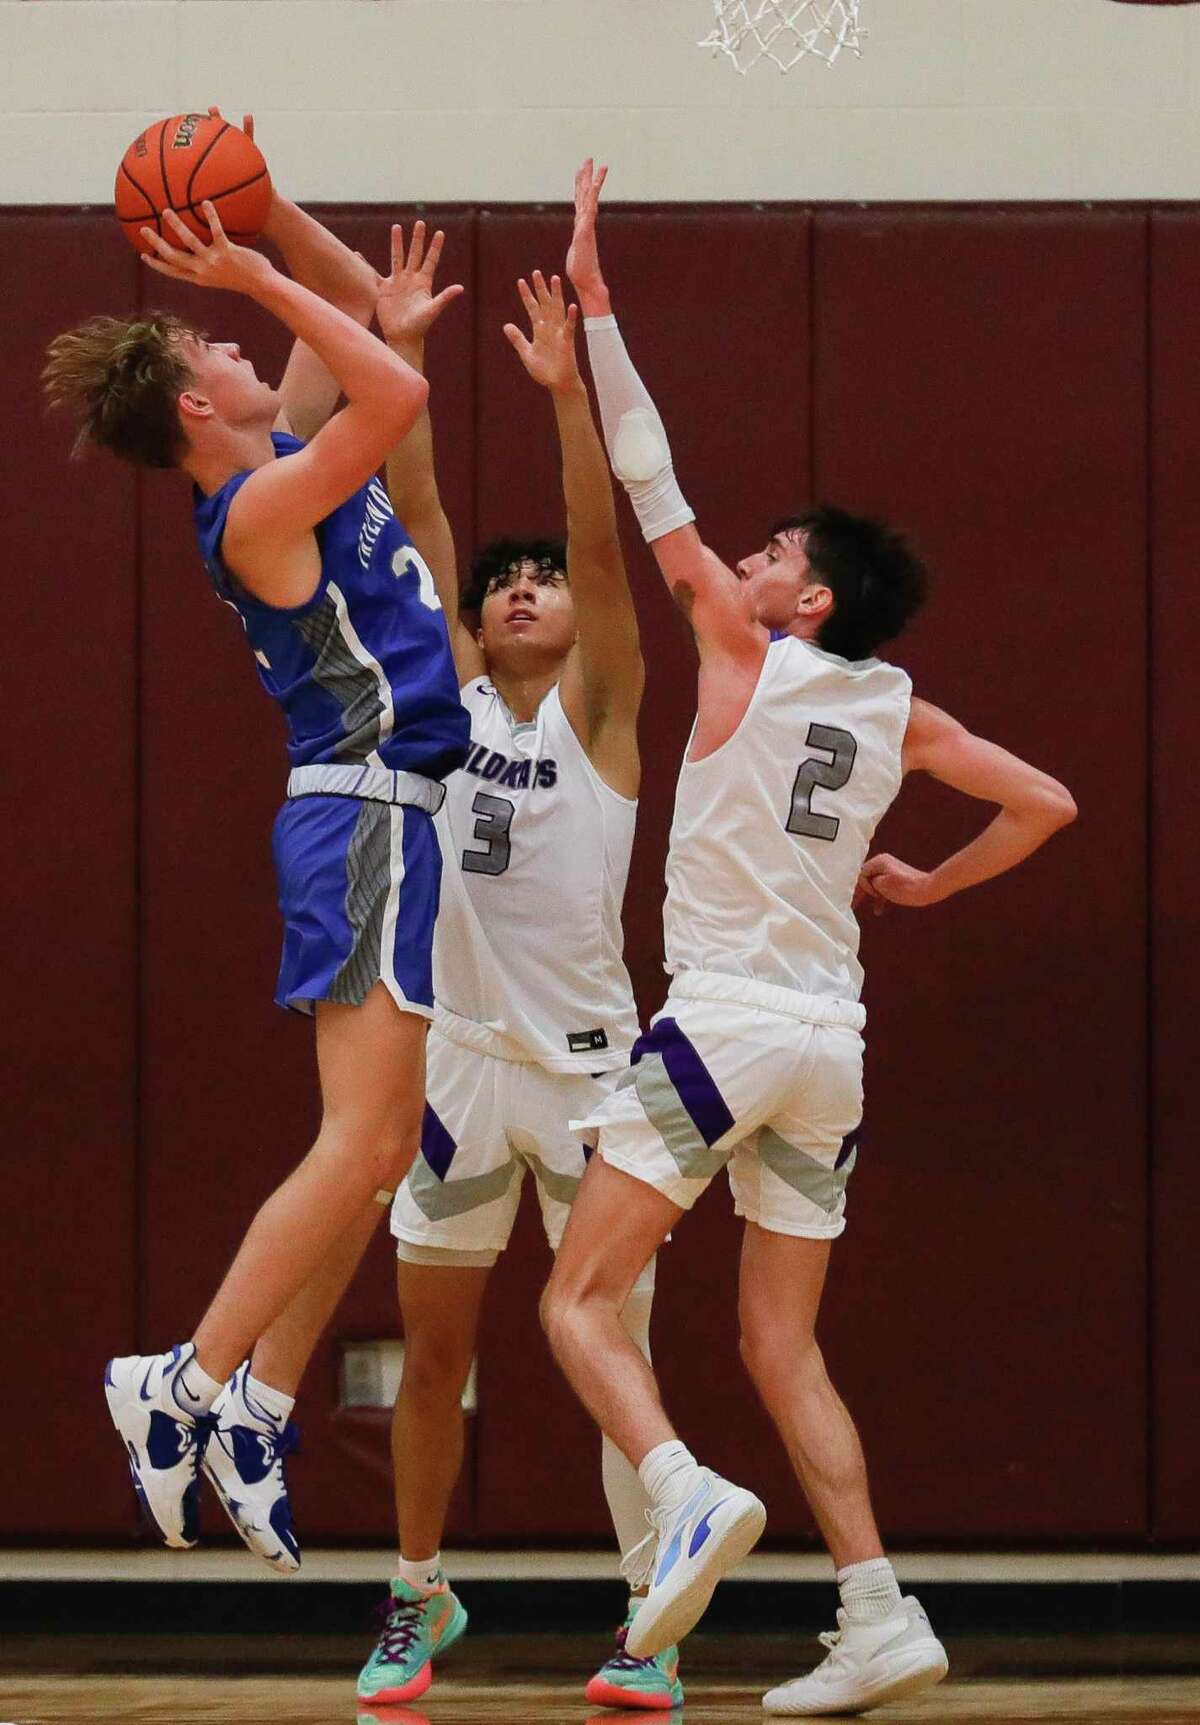 Friendswood’s T.J. Weatherly (22) goes up for a shot against Willis’ Derek Lagway, Jr. (3) and Tanner Davis (2) during the Doghouse Invitational tournament in November in Magnolia.